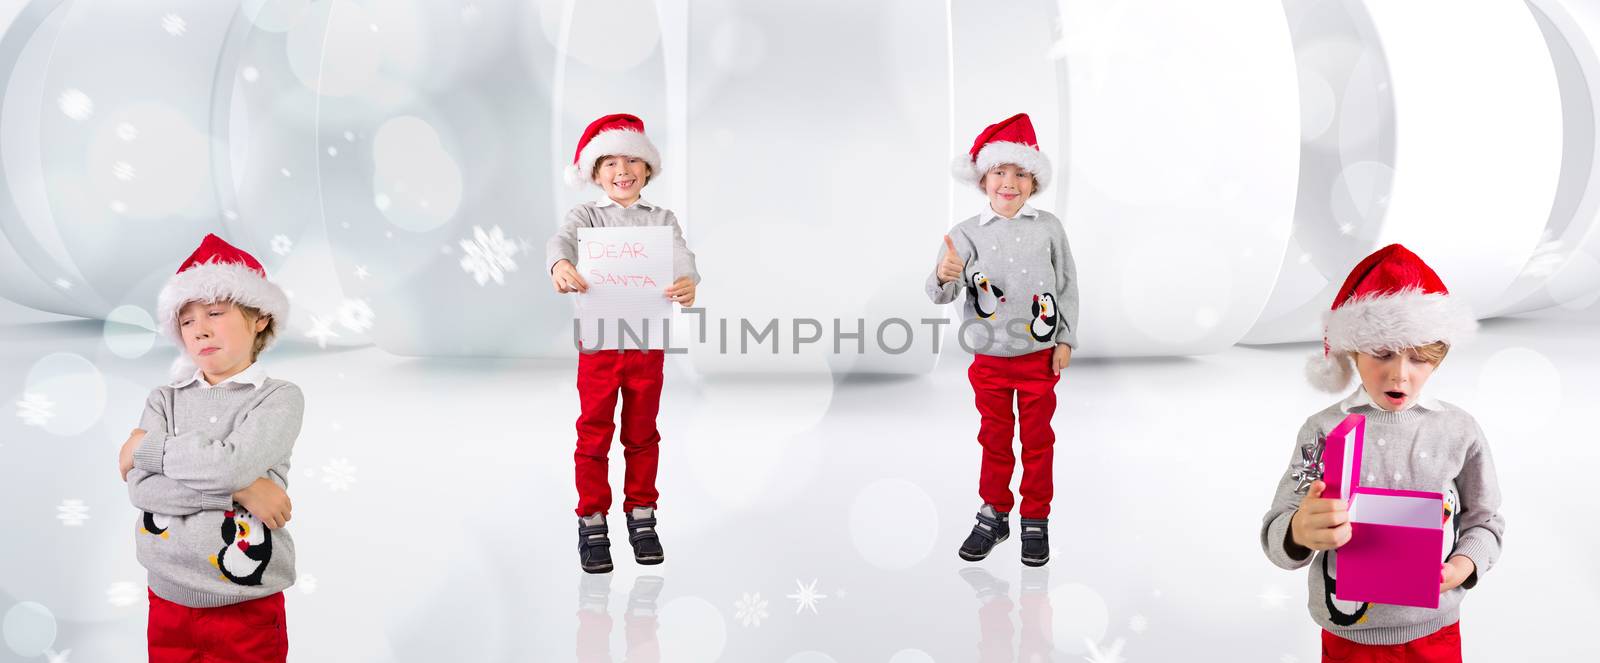 Composite image of different festive boys by Wavebreakmedia